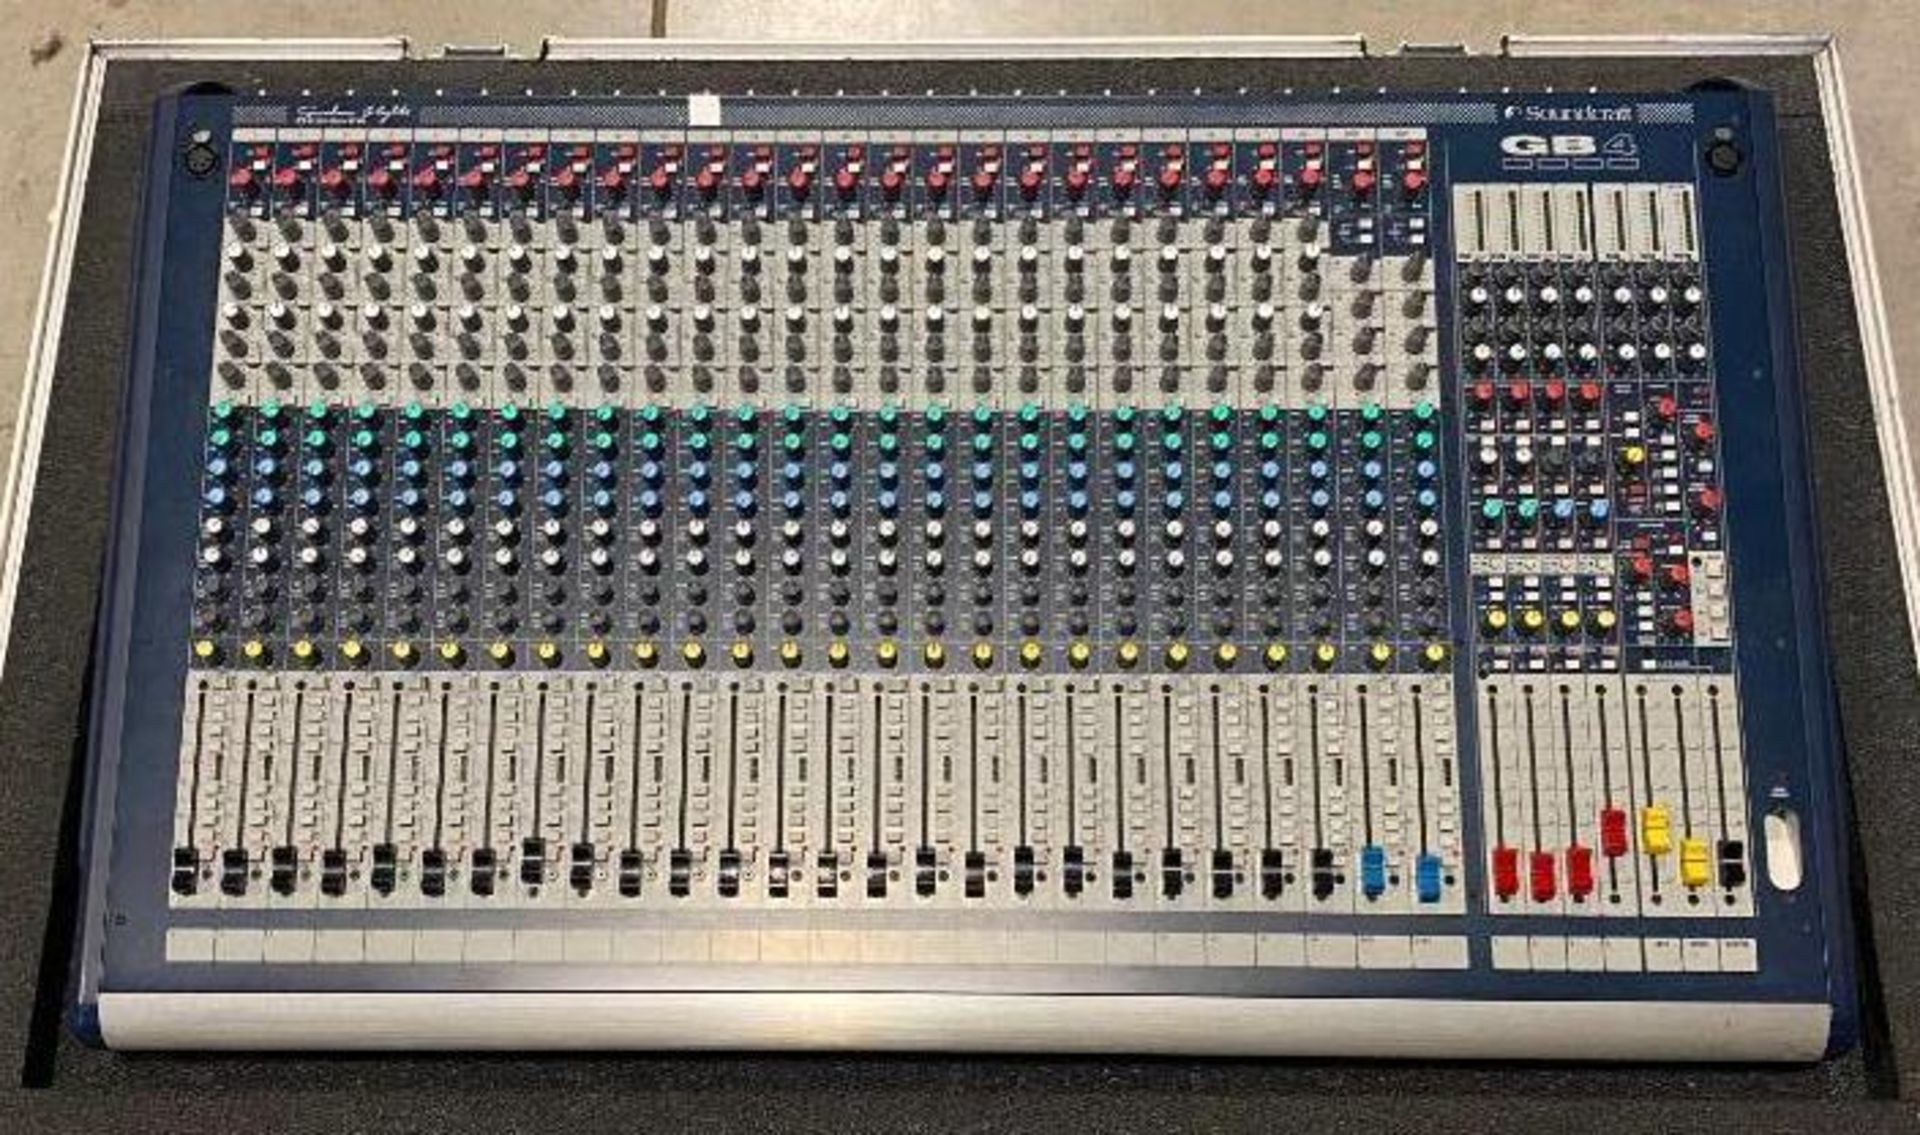 DESCRIPTION 24-CHANNEL ANALOG MIXER WITH ROAD CASE ON CASTERS BRAND/MODEL SOUNDCRAFT GB4 QUANTITY: X